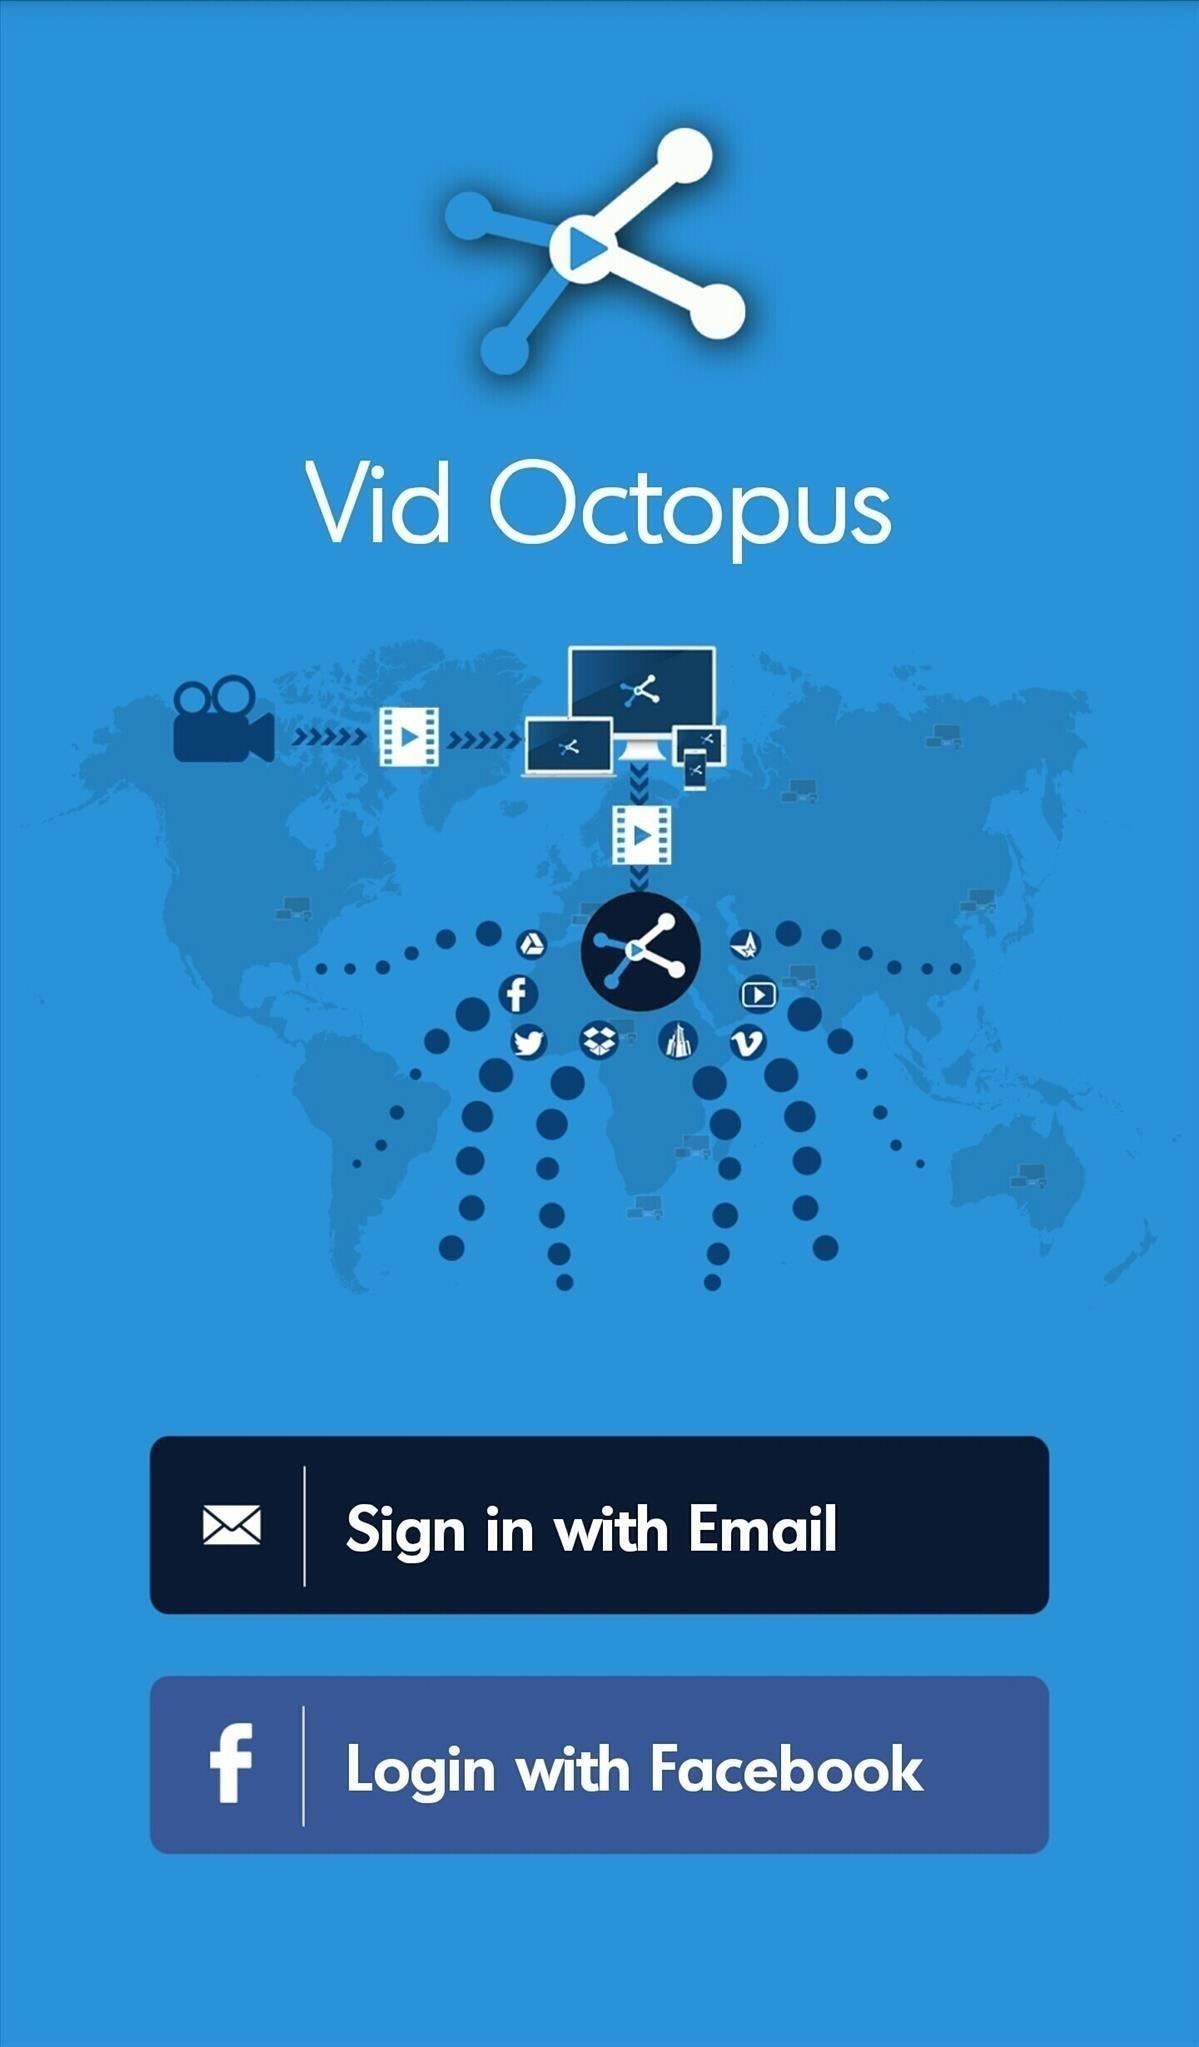 How to Upload Videos to Multiple Video Sites Like YouTube, Facebook, & Dailymotion at Once Using Vid Octopus